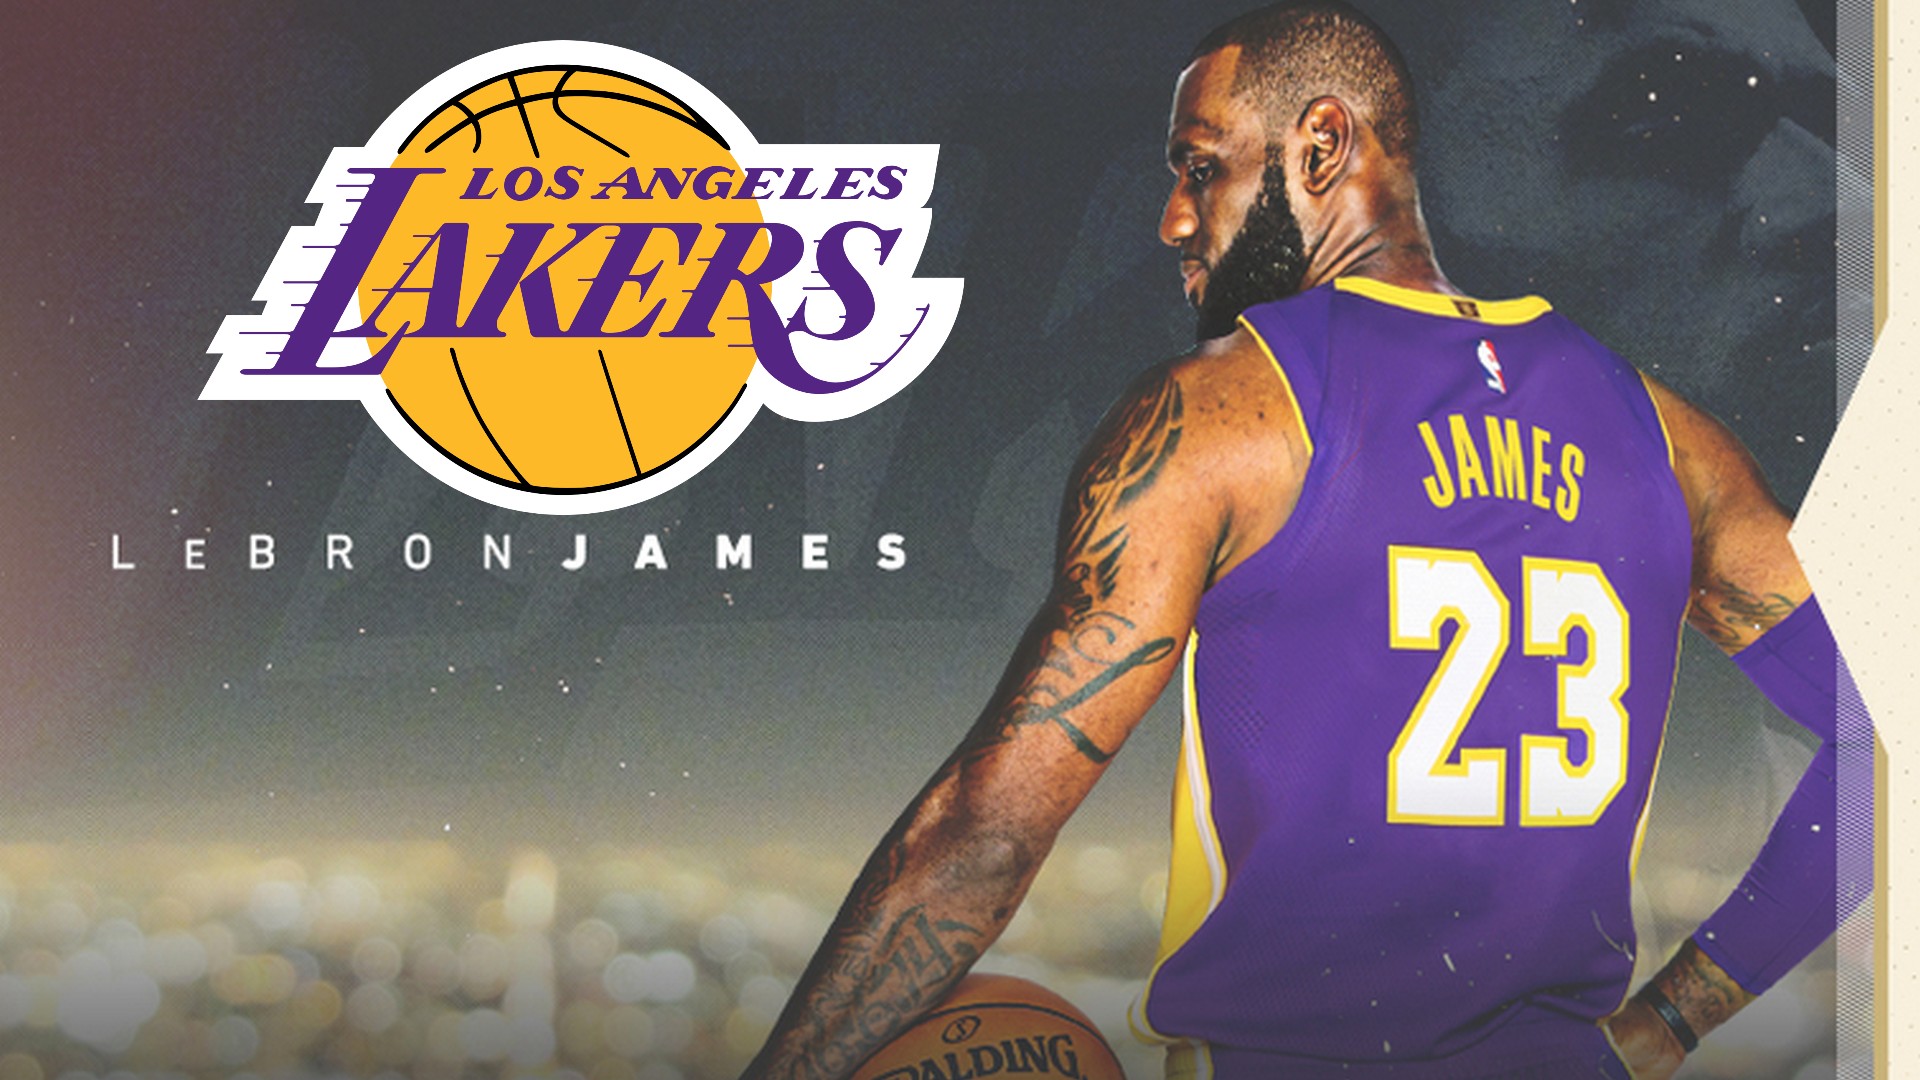 Wallpapers HD LeBron James Lakers with image dimensions 1920x1080 pixel. You can make this wallpaper for your Desktop Computer Backgrounds, Windows or Mac Screensavers, iPhone Lock screen, Tablet or Android and another Mobile Phone device